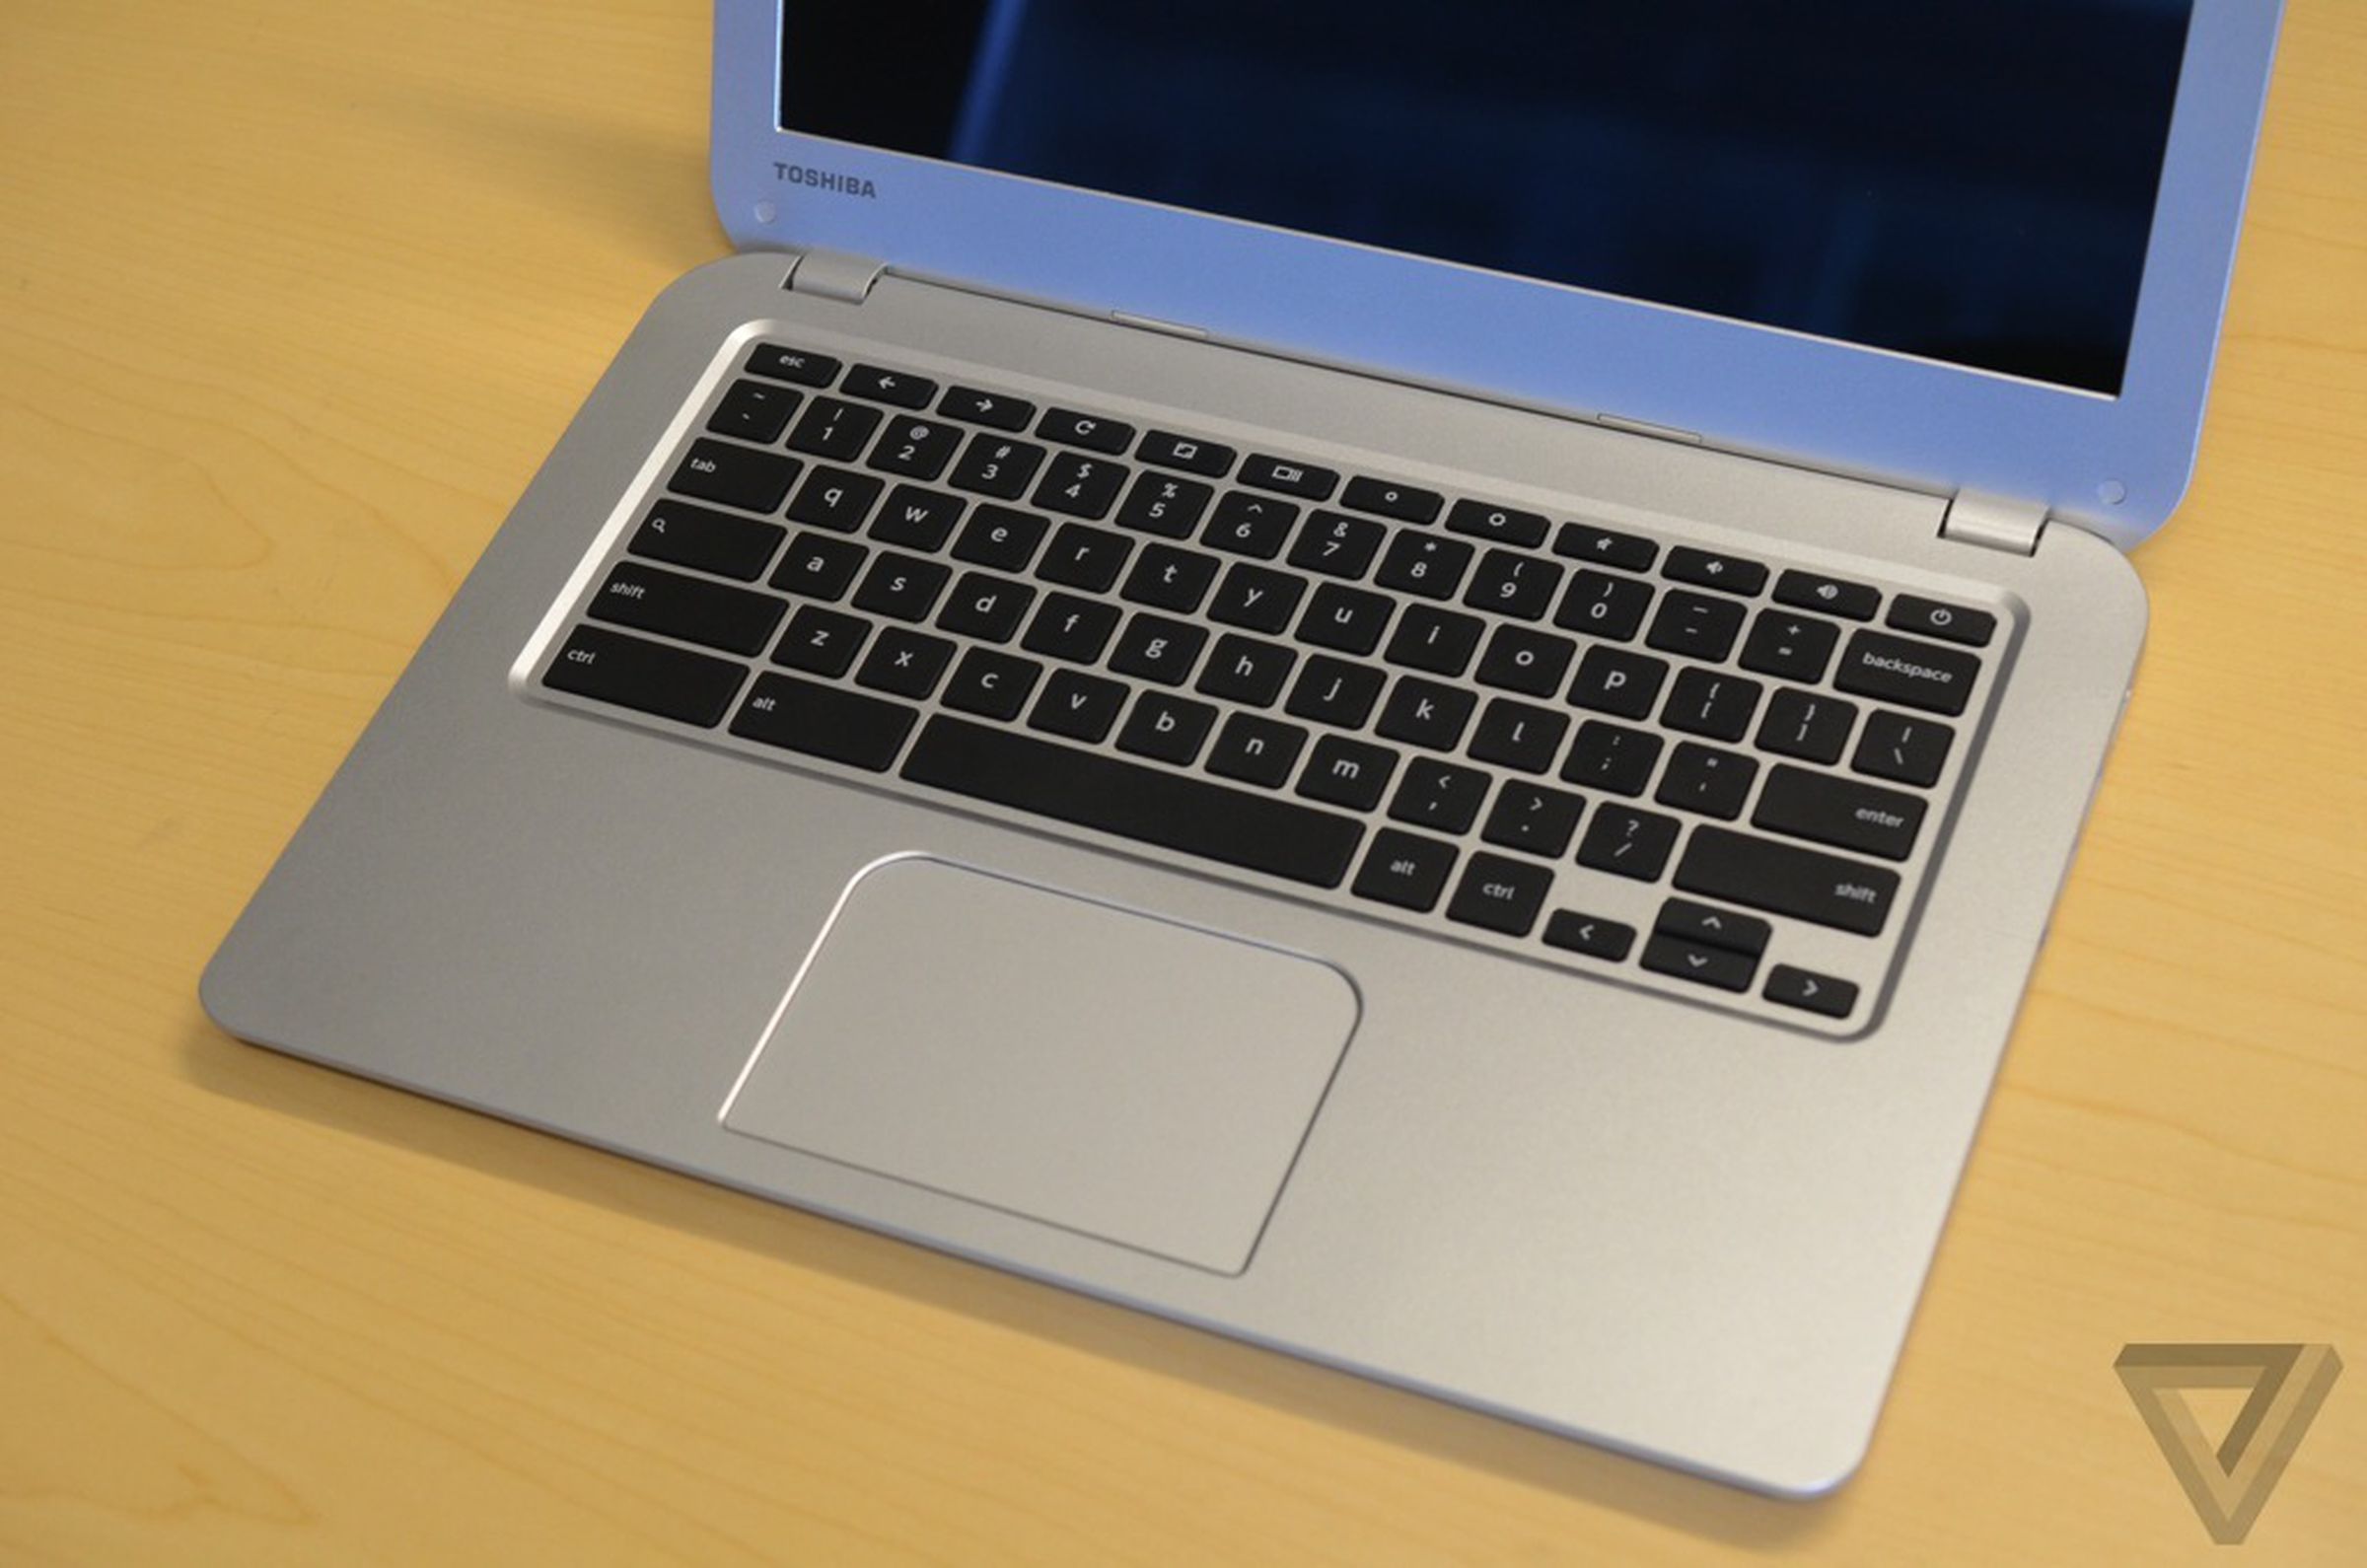 Toshiba Chromebook hands-on pictures